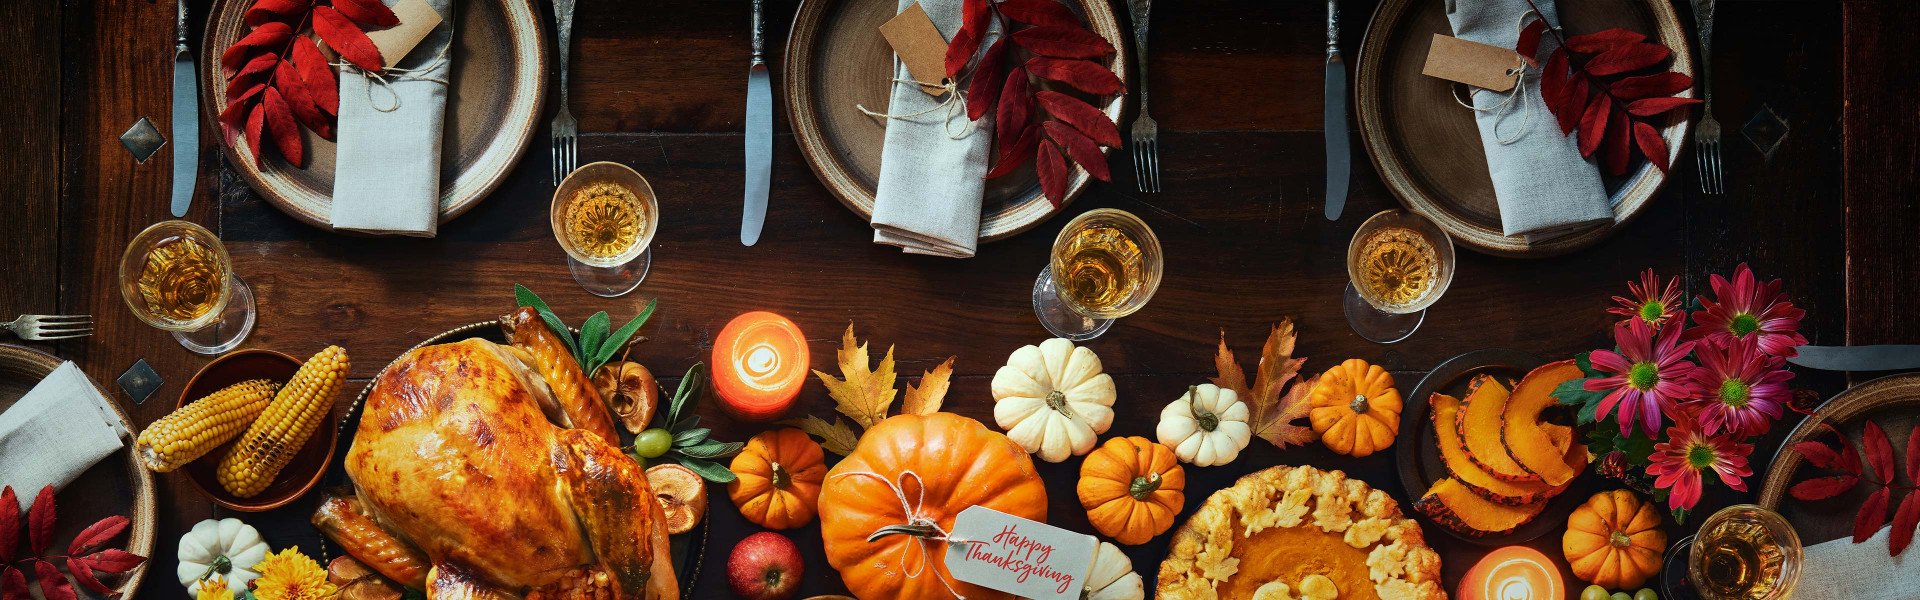 Top Best Long-Distance Gifts to Celebrate Thanksgiving